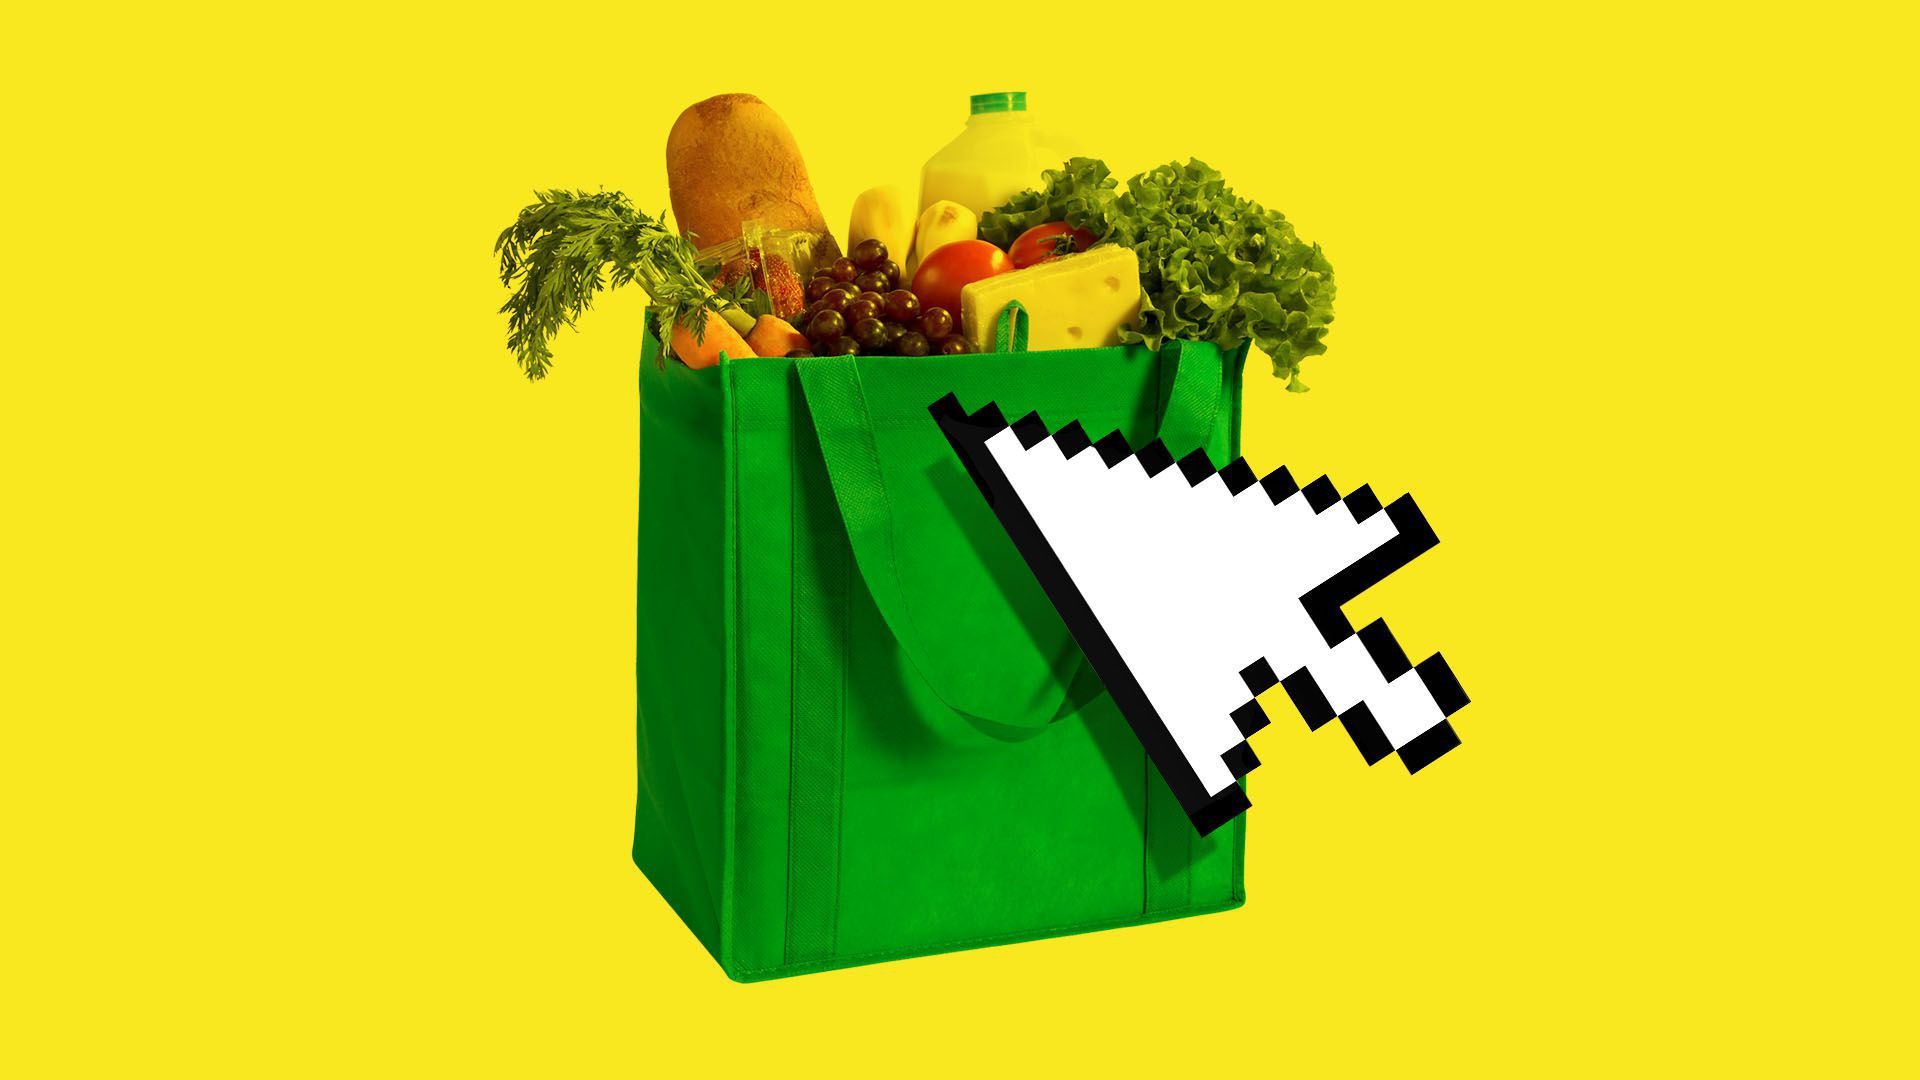 An illustration of a bag of groceries covered by a giant cursor all against a yellow background.